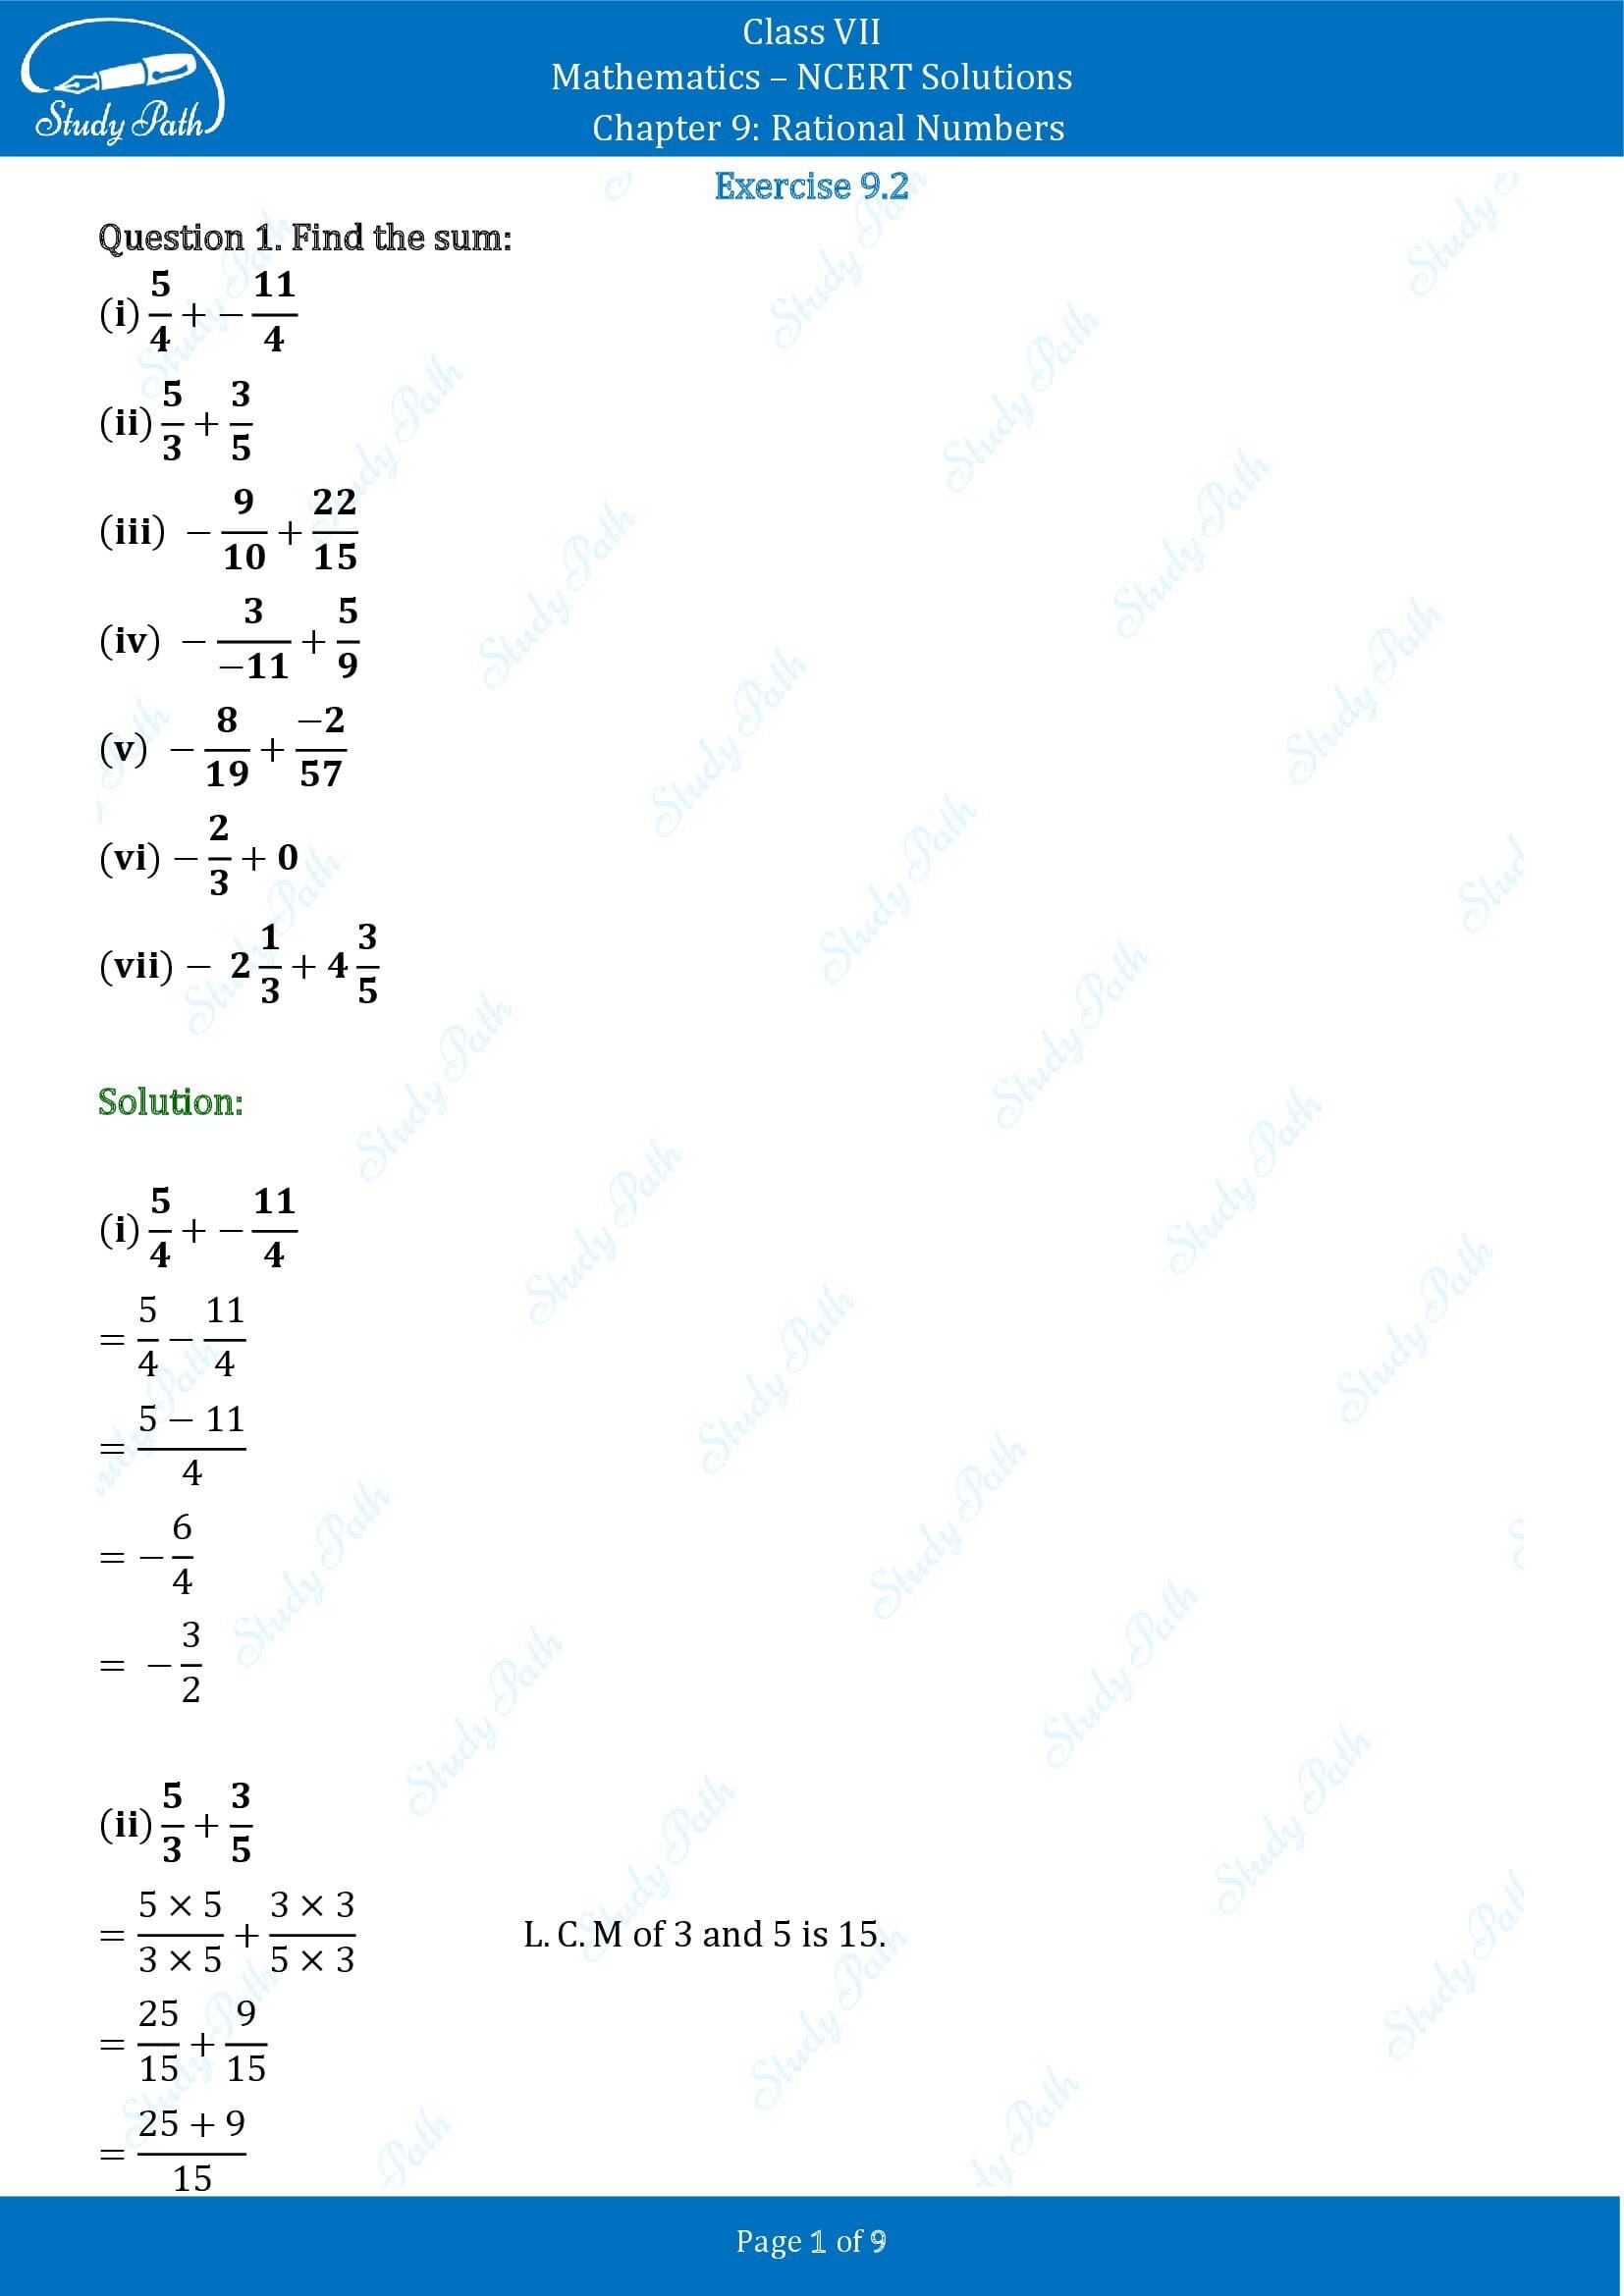 NCERT Solutions for Class 7 Maths Chapter 9 Rational Numbers Exercise 9.2 00001